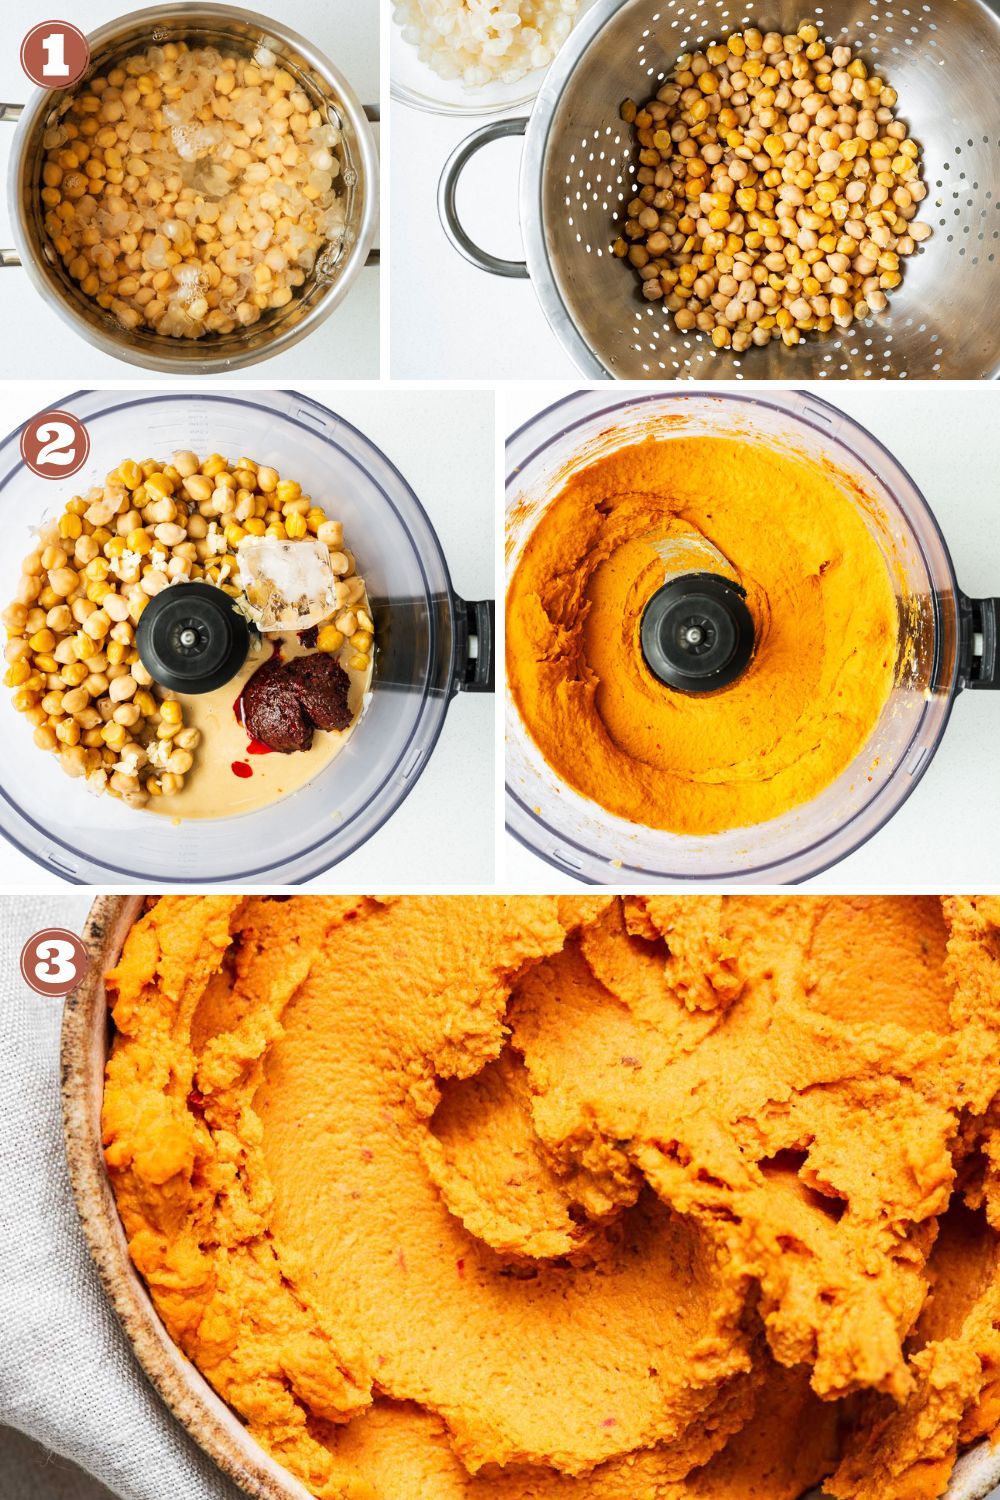 Step-by-step instructions for making ultra-smooth harissa hummus from canned chickpeas.